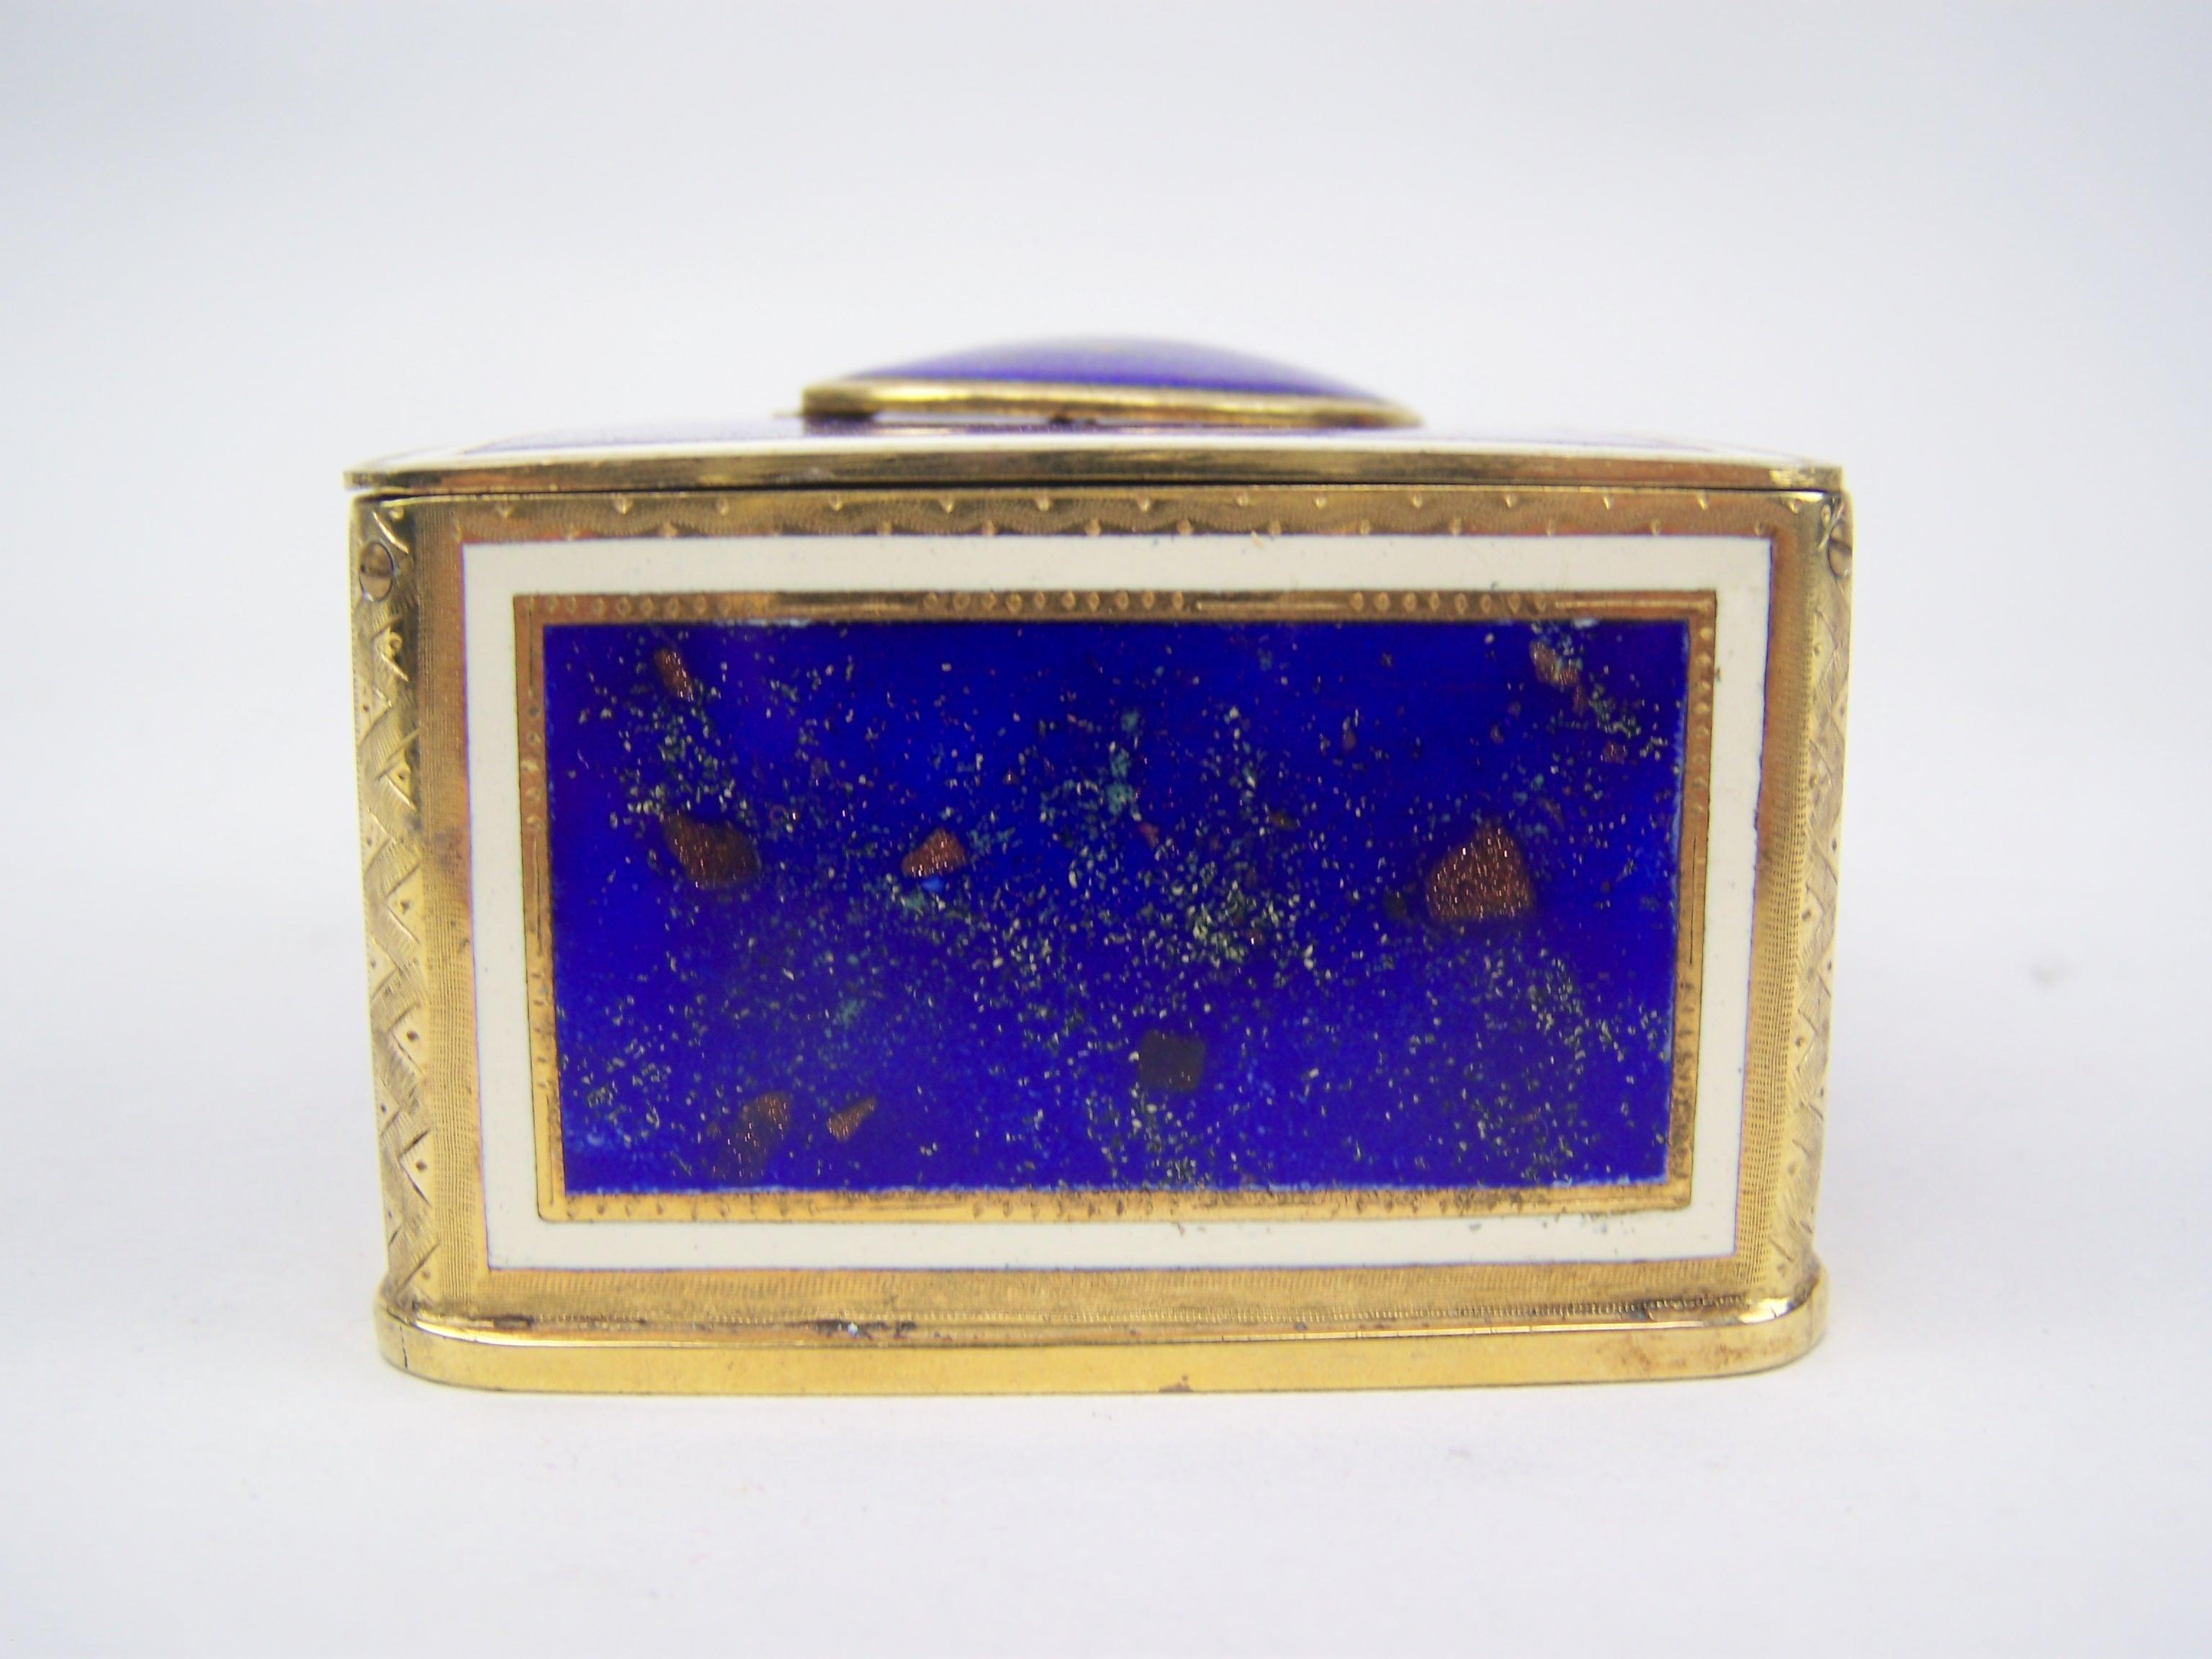 German Singing bird box by K Griesbaum in guilded case and blue-goldflaked enamel